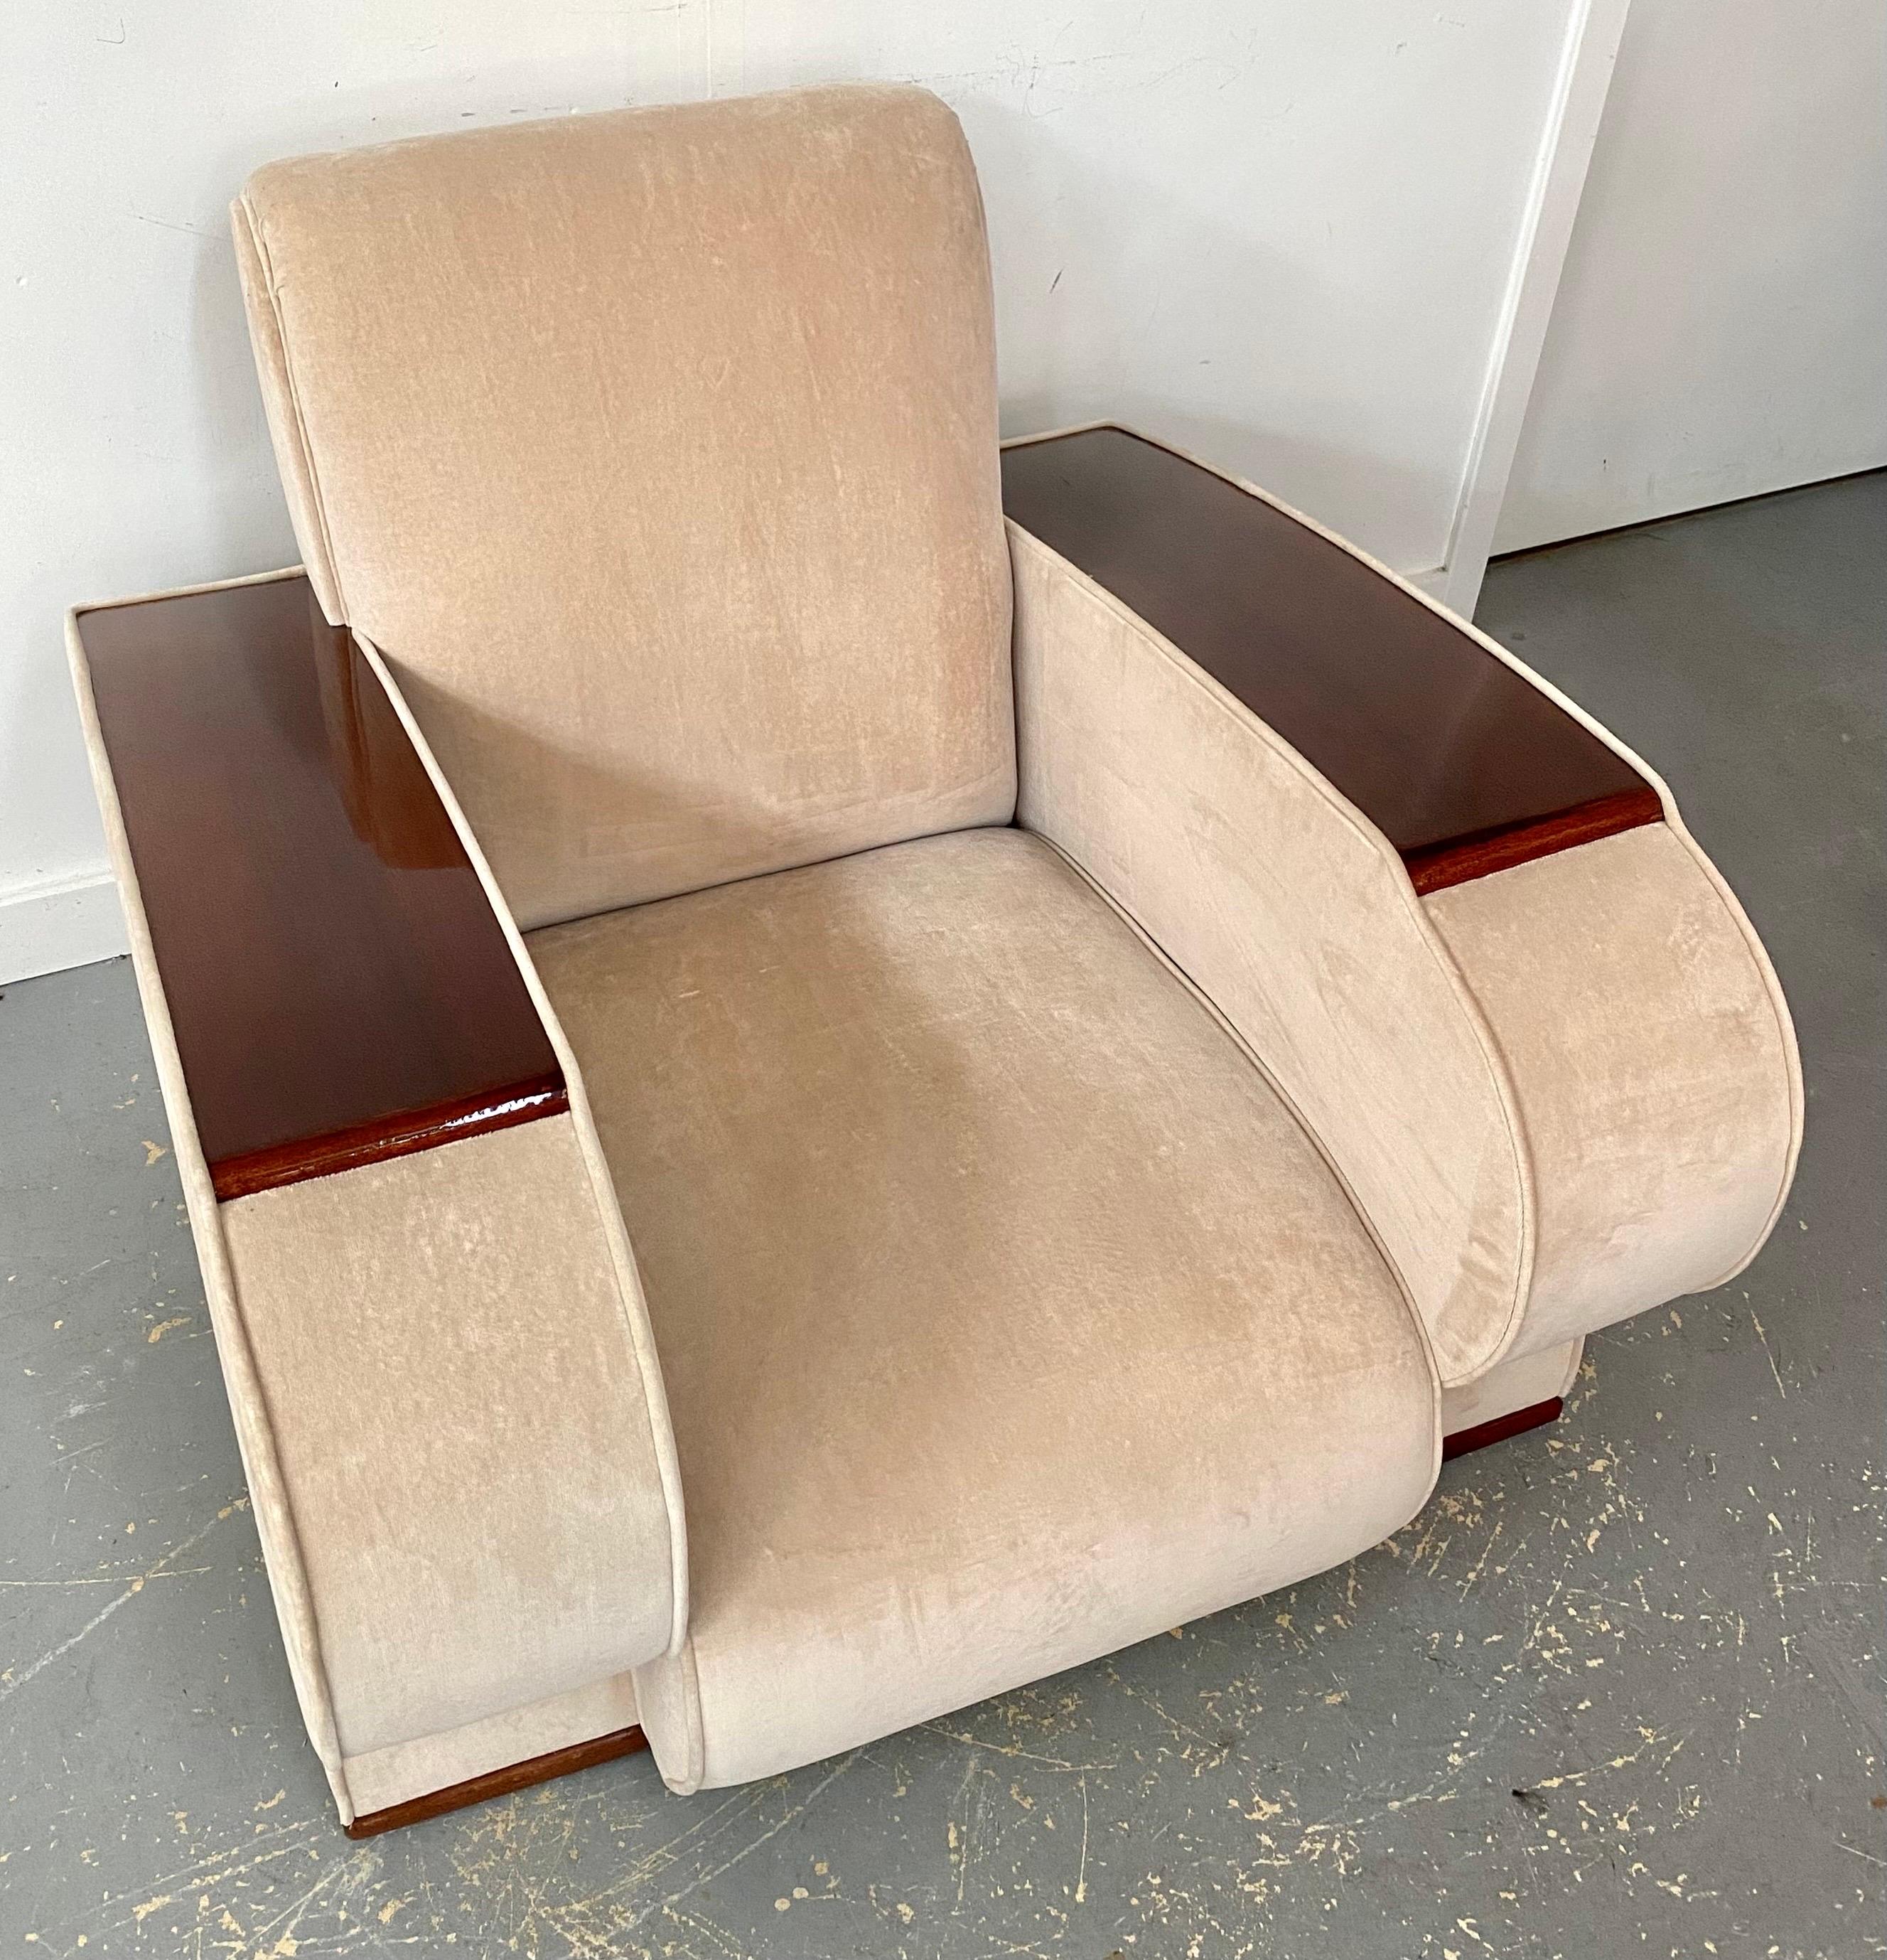 French Art Deco Club or Lounge Chair in Beige Suede Upholstery, a Pair  For Sale 7